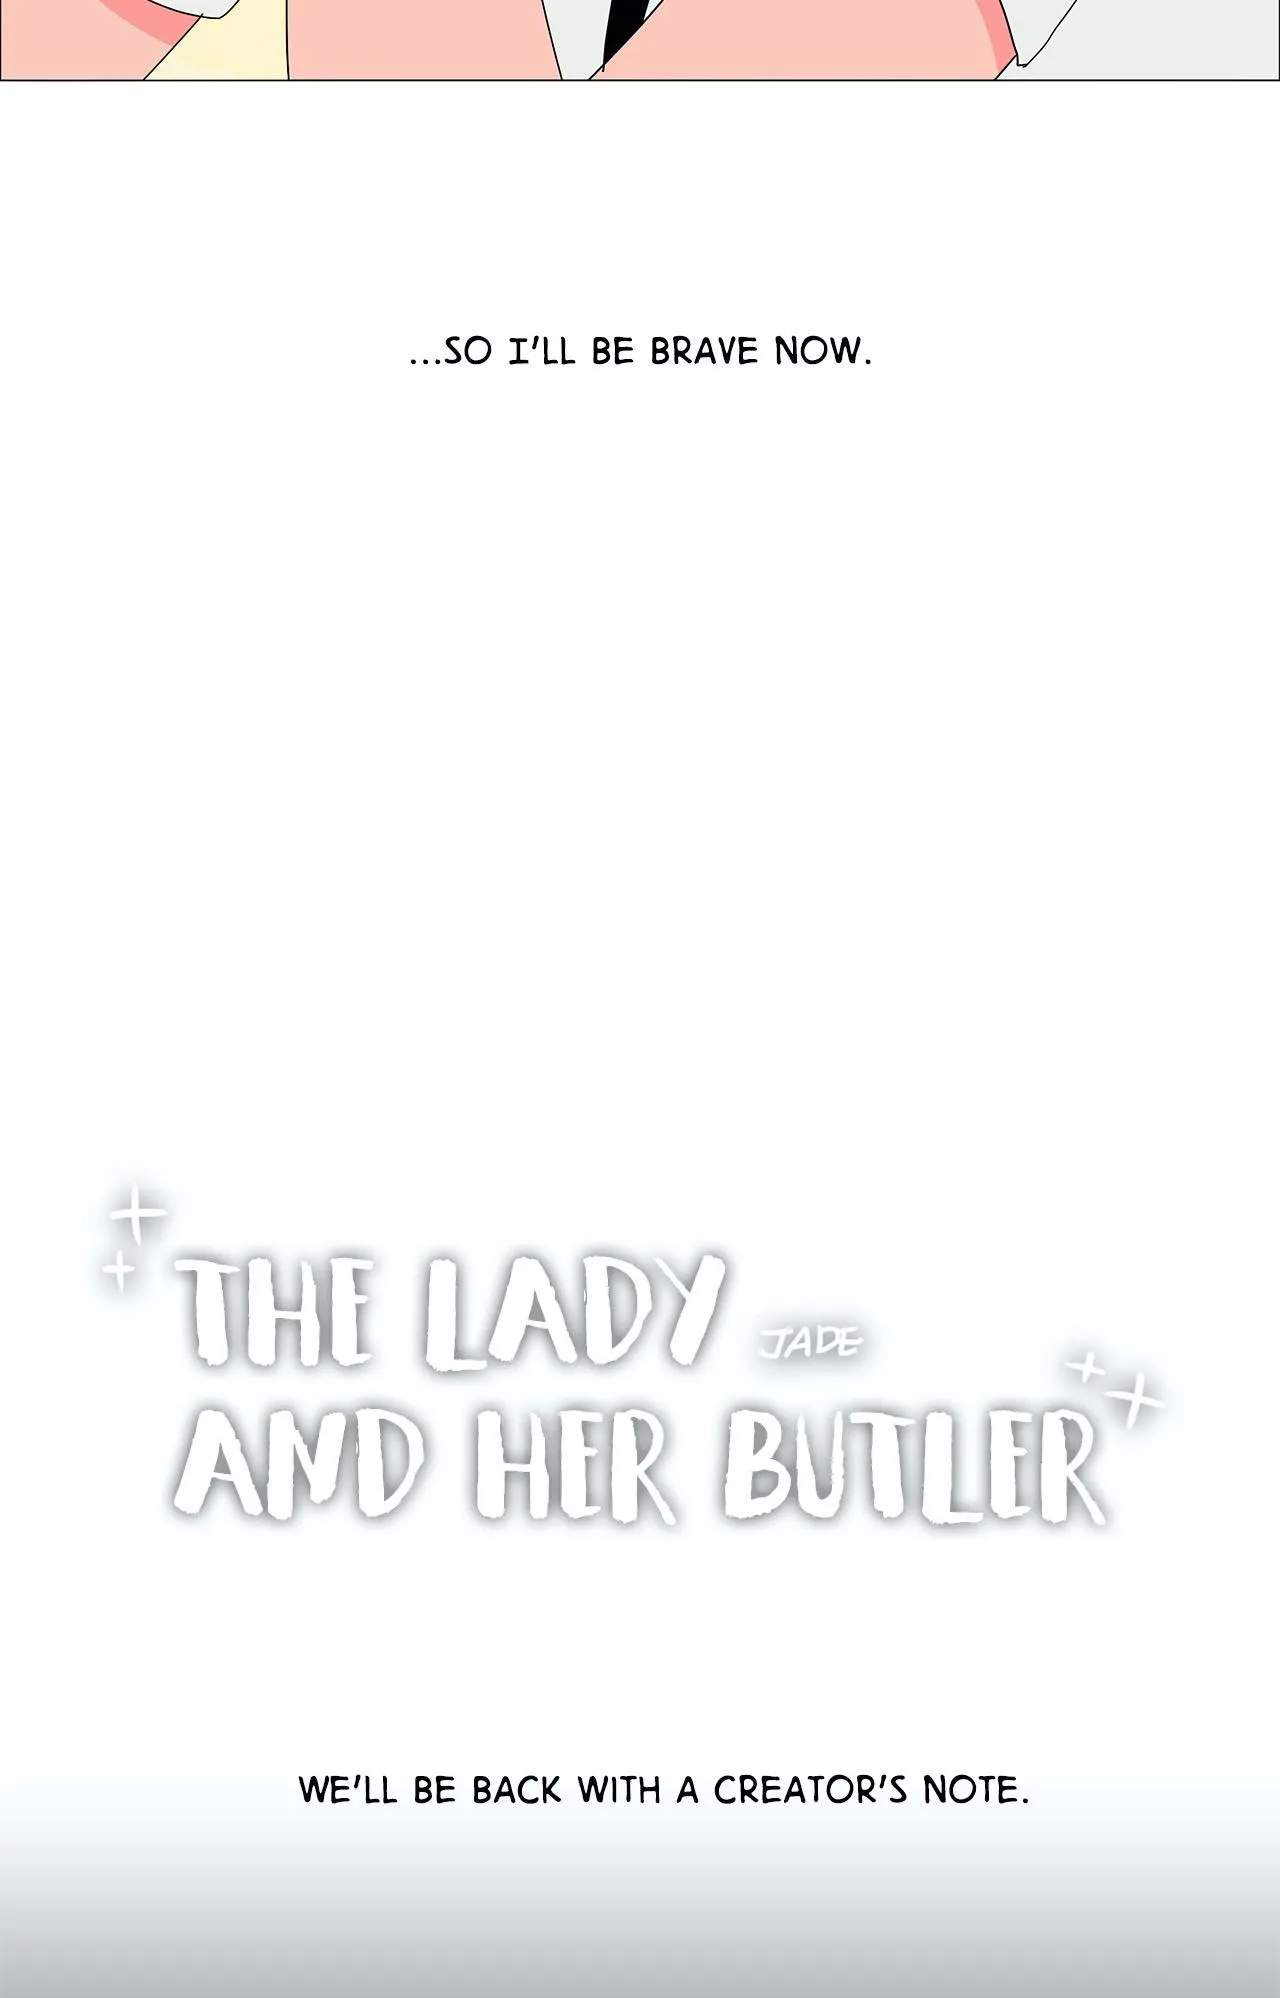 The Lady and Her Butler image